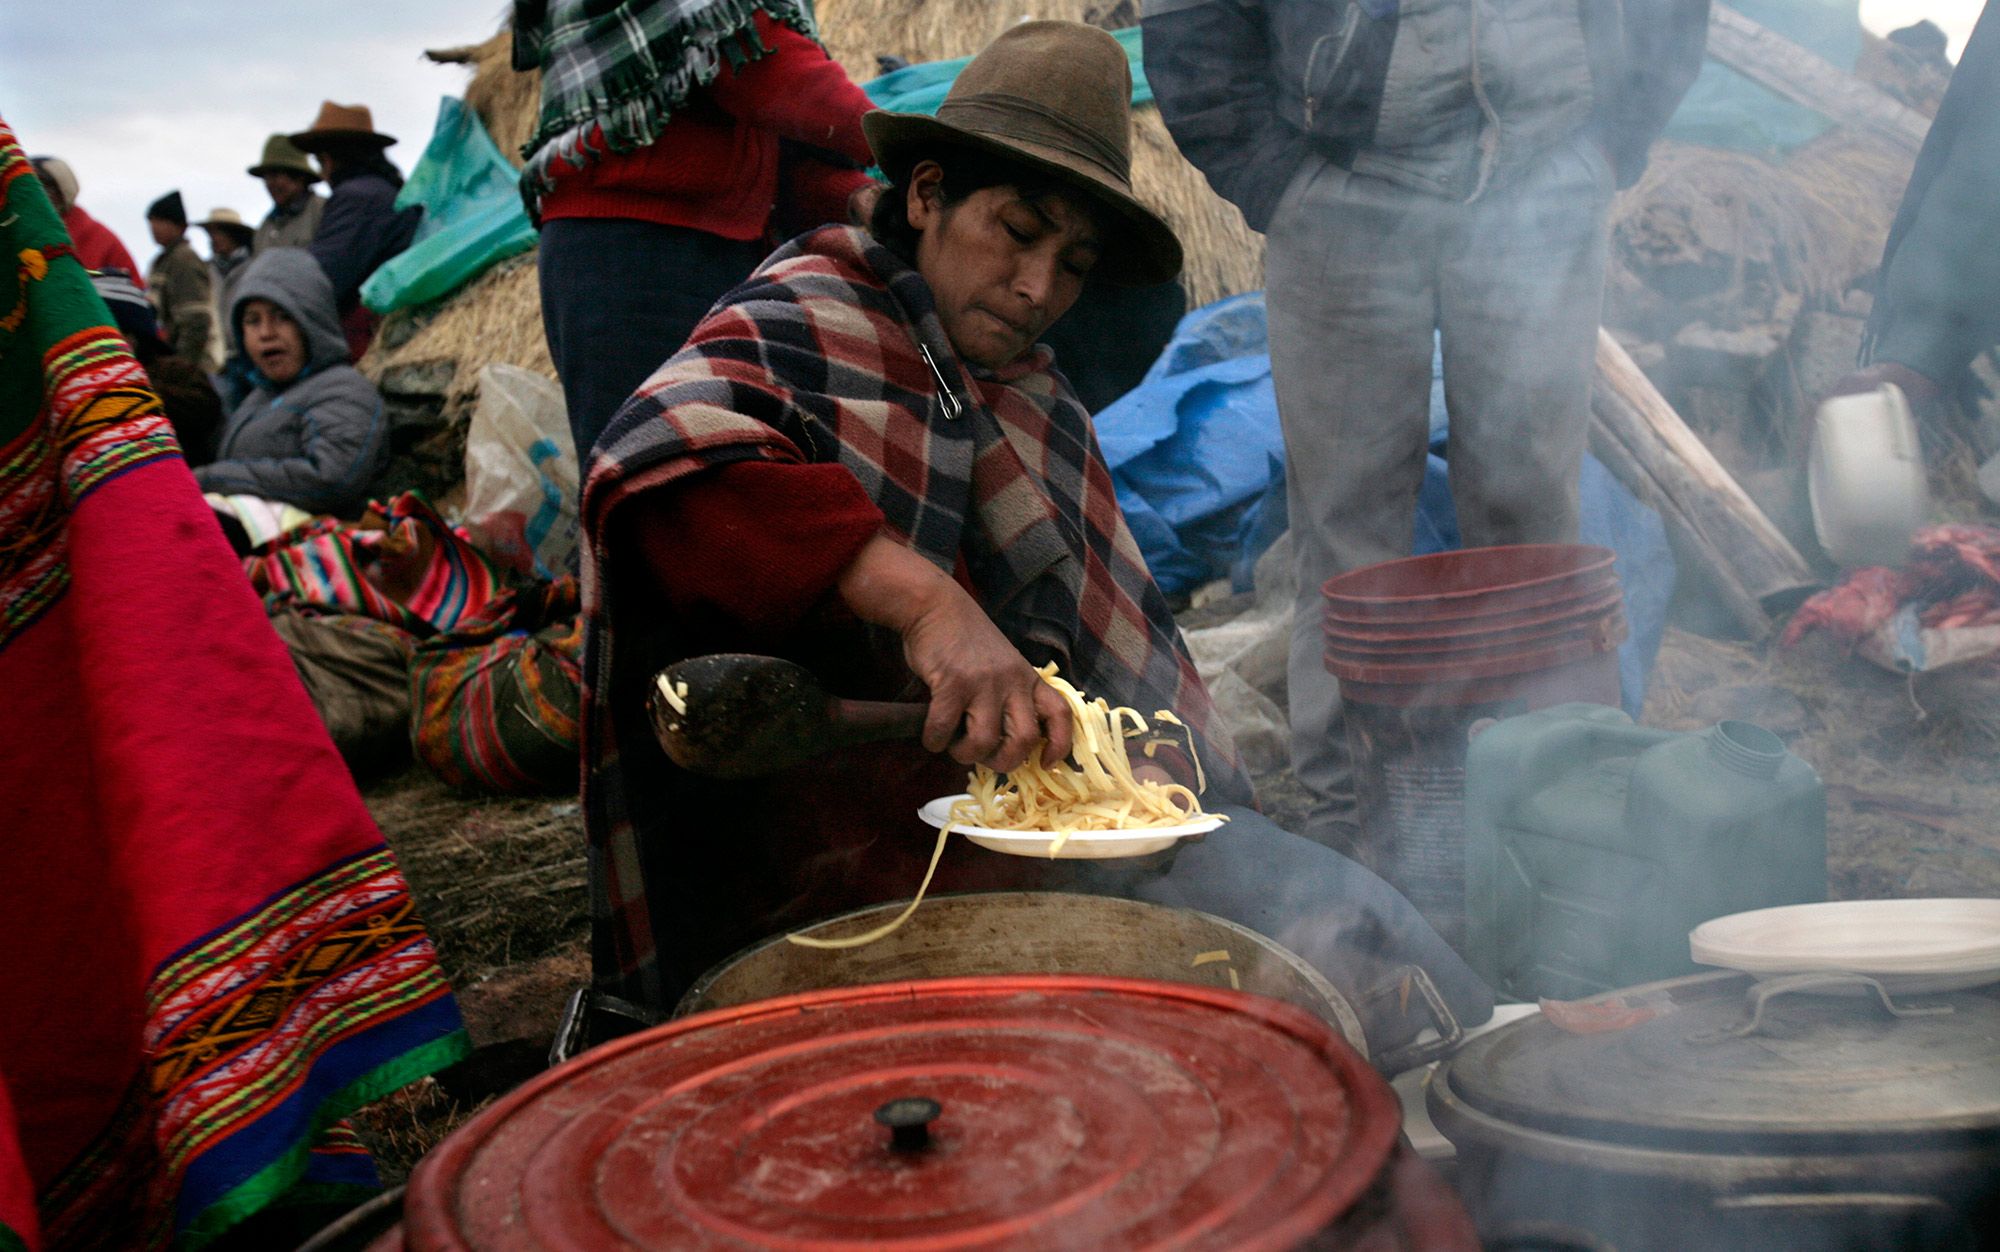 Cooking for Yawar Fiesta celebration in the Peruvian Andes. Photo by Karla Gachet/Panos